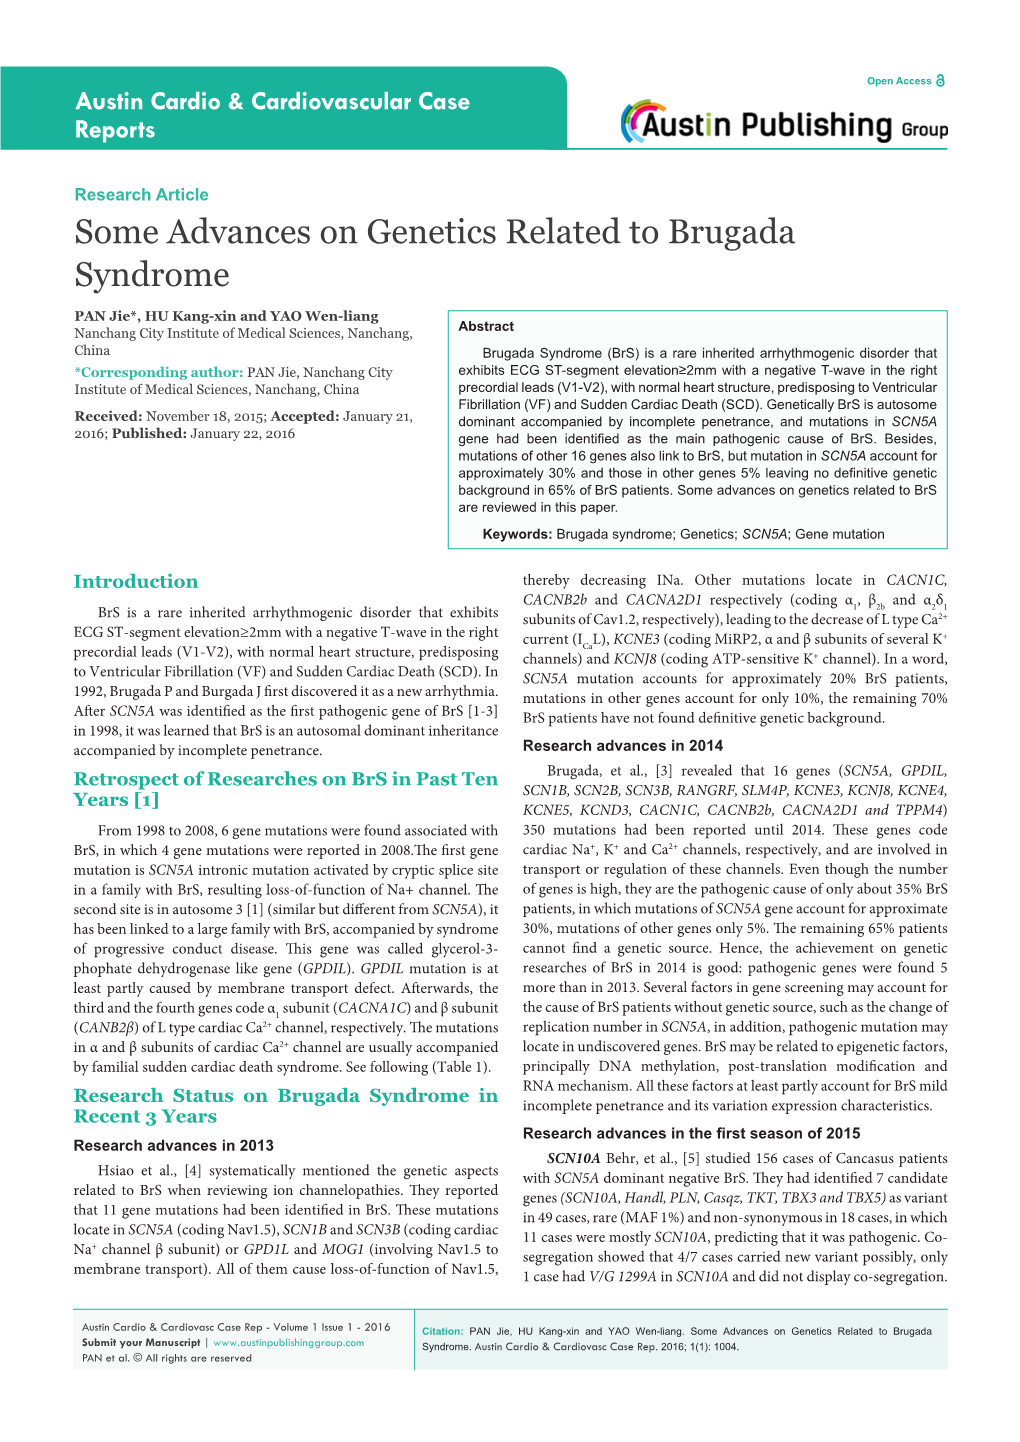 Some Advances on Genetics Related to Brugada Syndrome